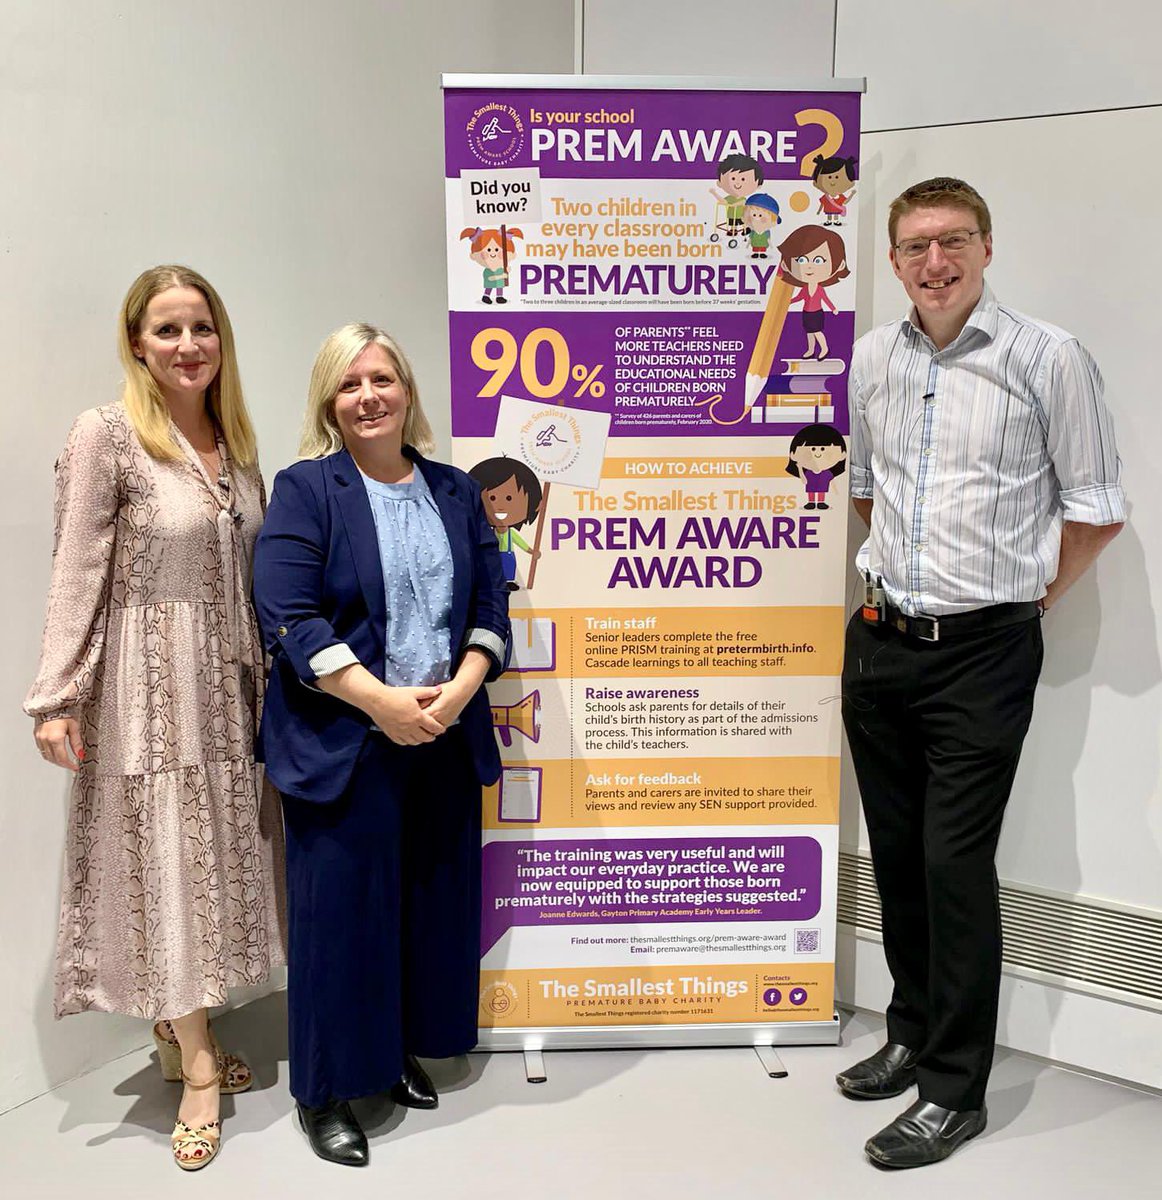 Dream team! A fantastic morning at the @uniofleicester with @SamJPsych and these two powerhouses @catriona_ogilvy @MattWilkinson79 hosting a webinar on supporting your #prem child at school and all things #premaware @_SmallestThings